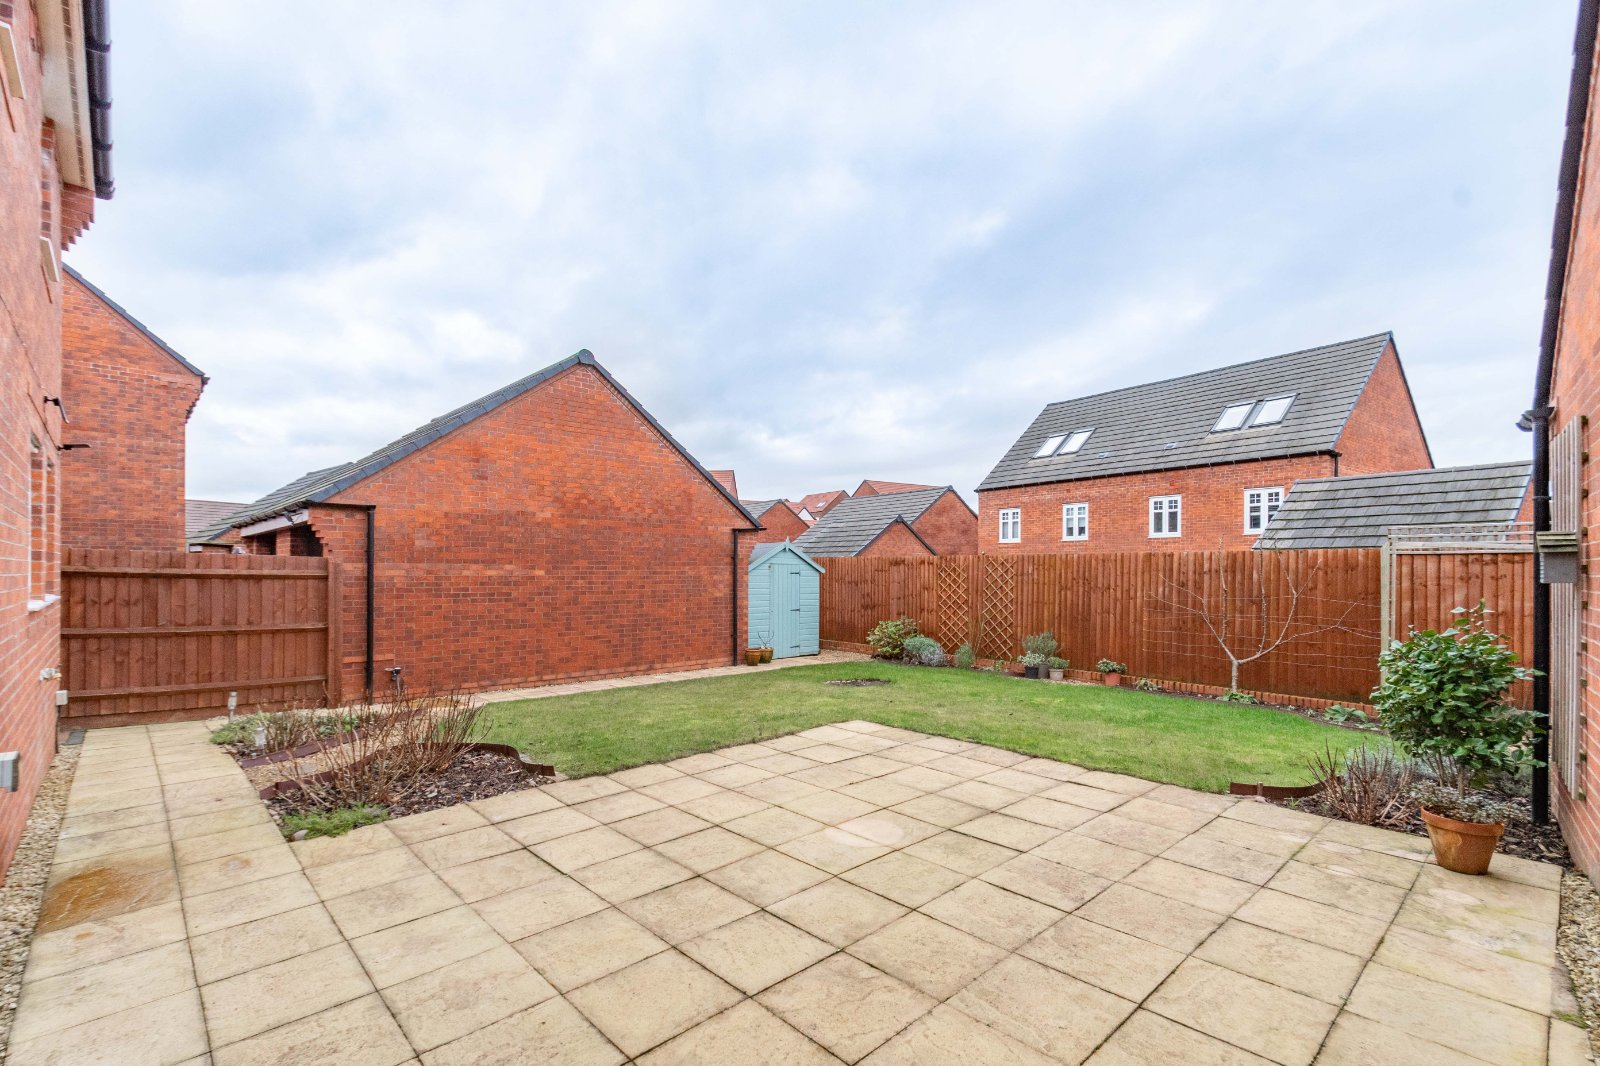 4 bed house for sale in Princethorpe Street, Bromsgrove 11